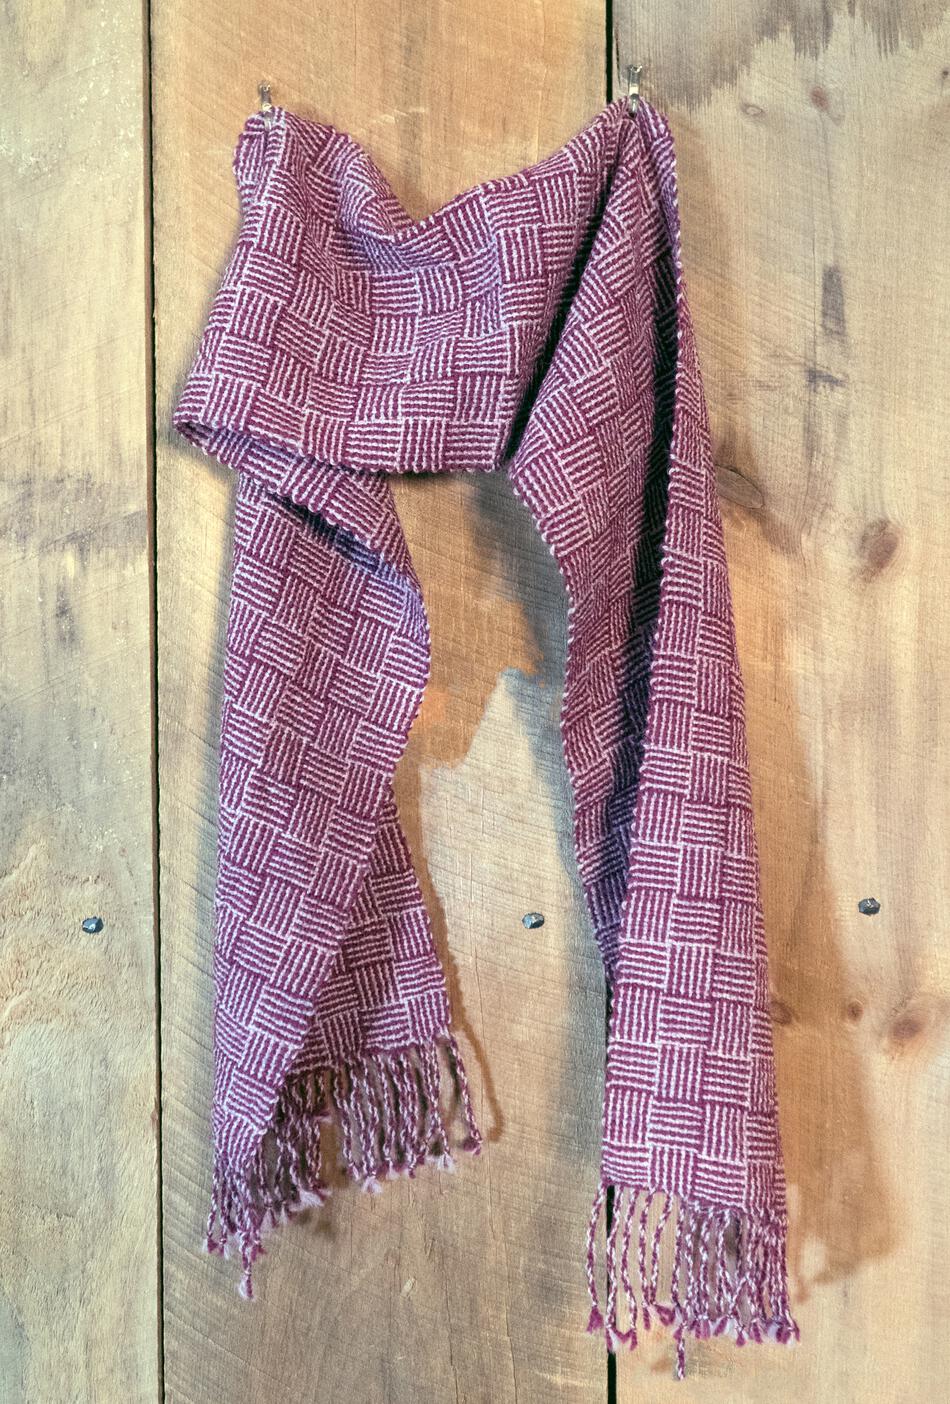 Weaving Patterns Rivers and Roads  Woven Scarf Pattern